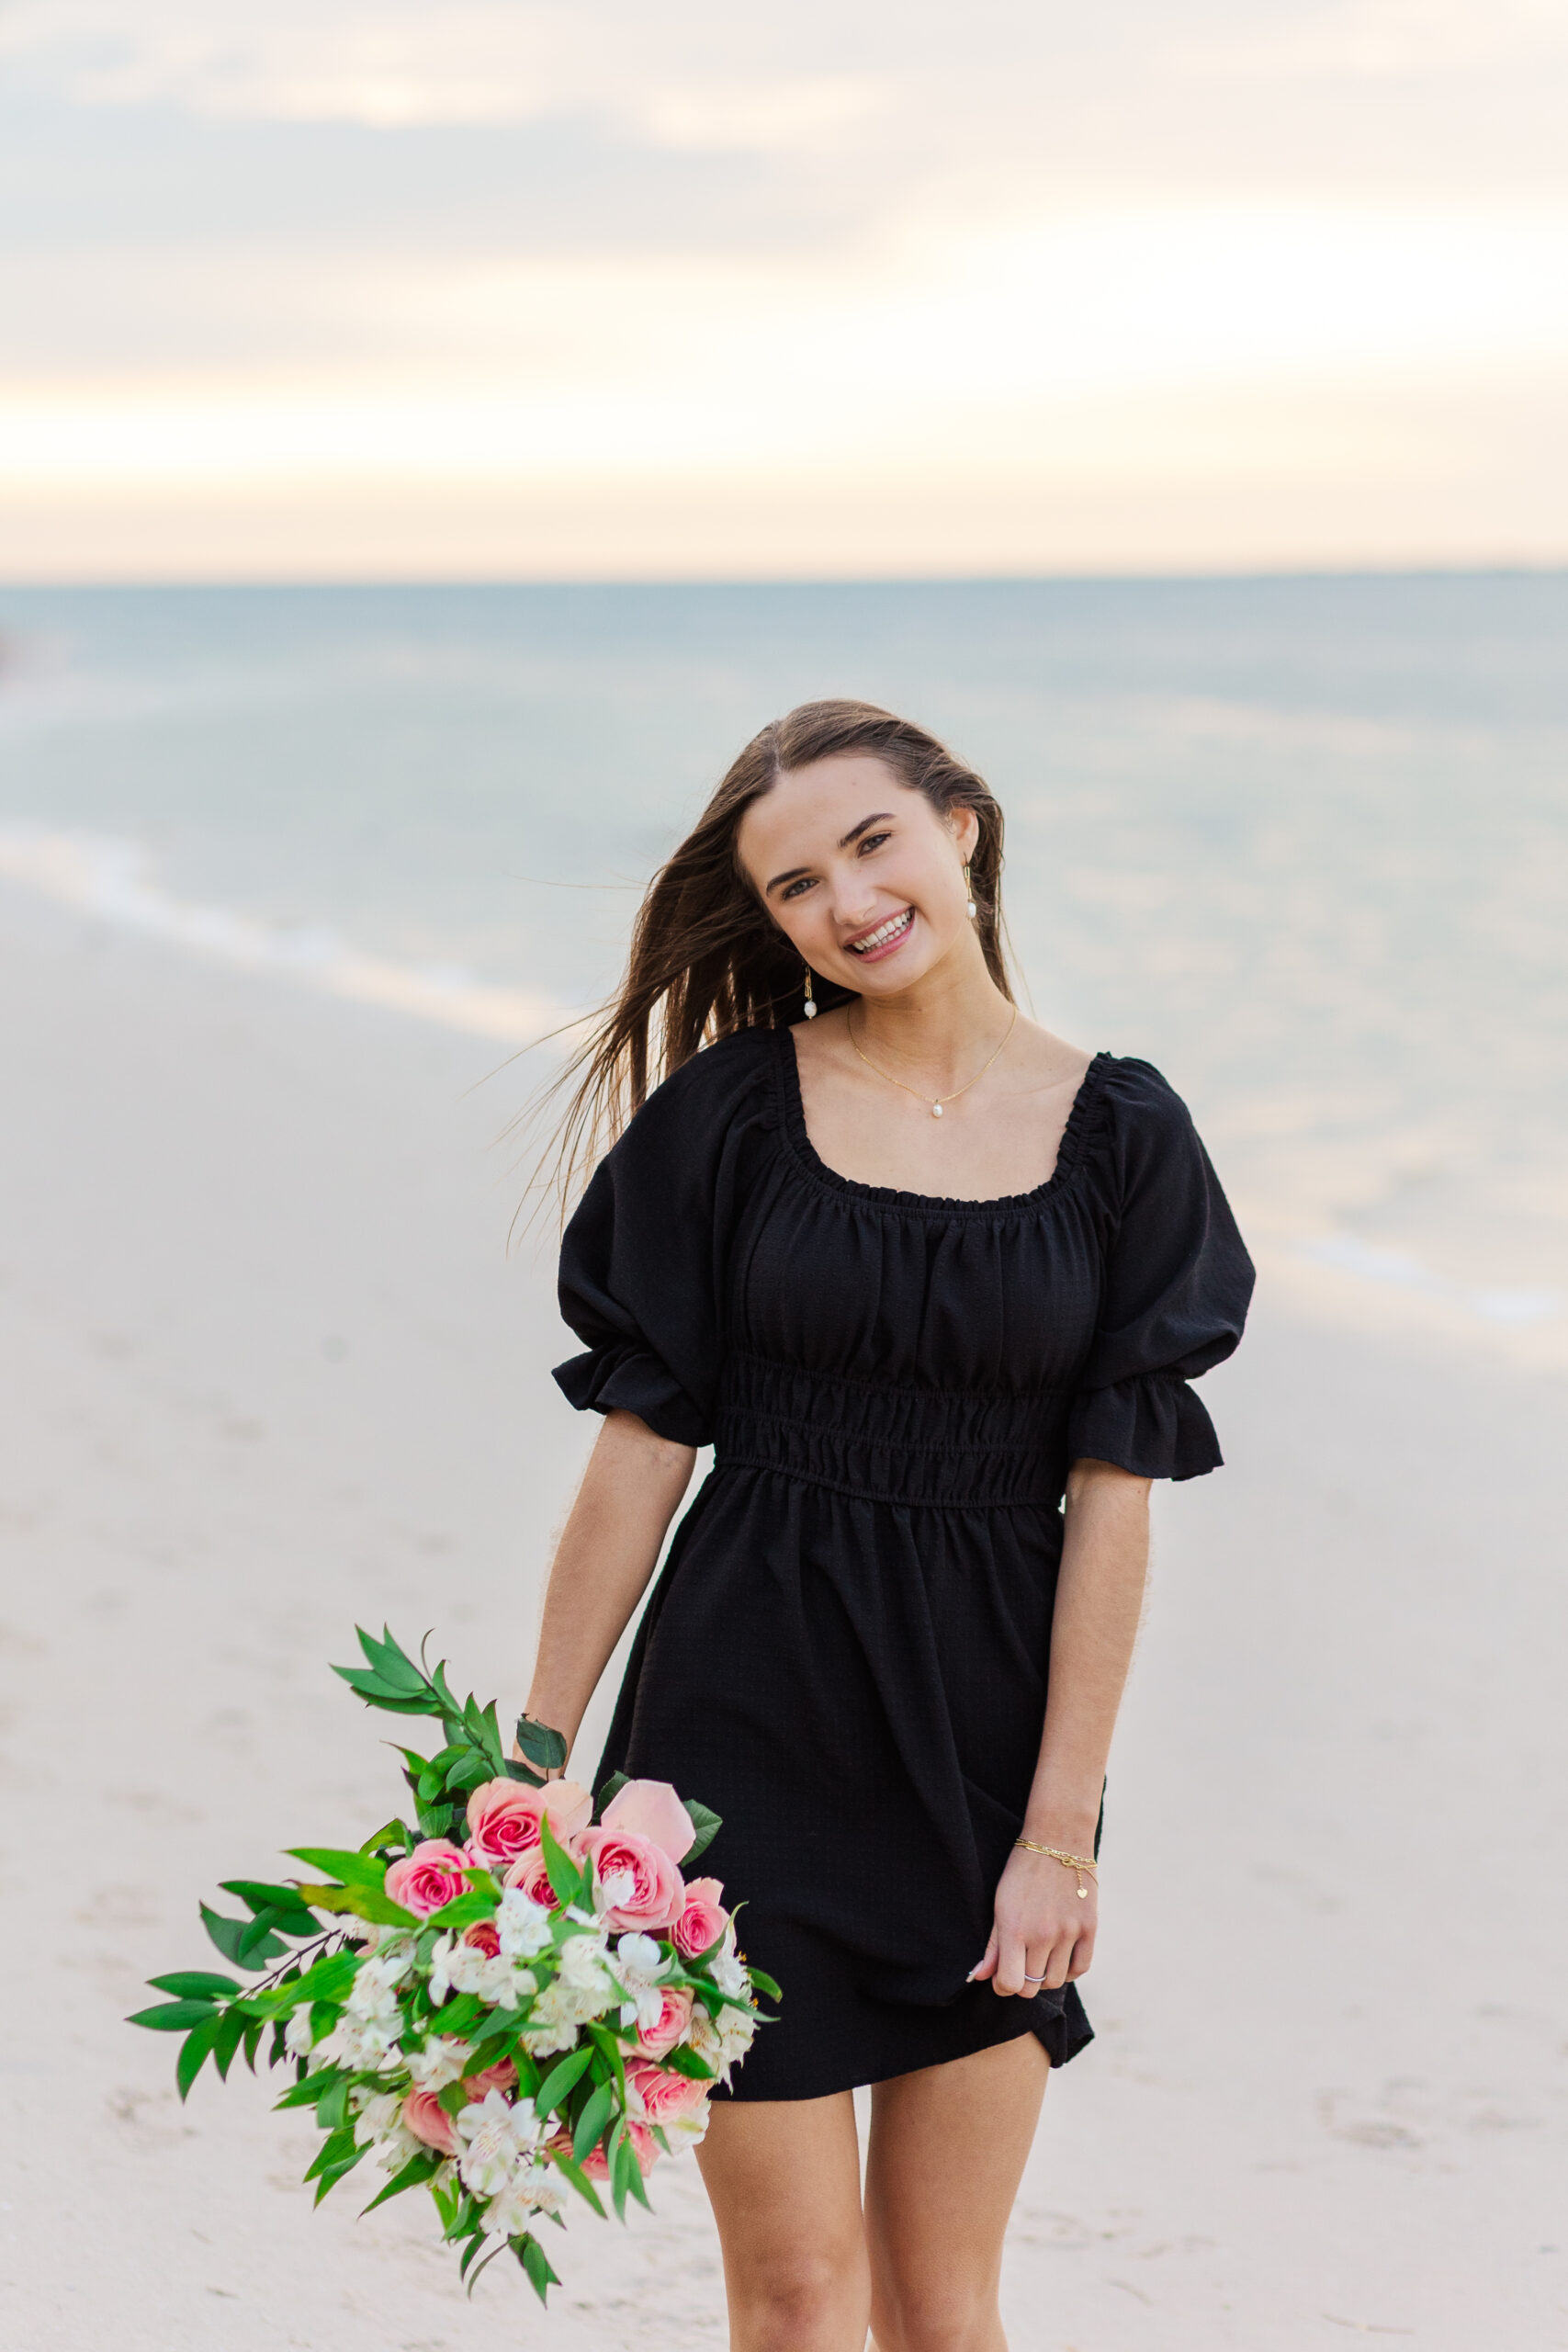 High School Senior, walking on a beach with flowers. This senior wanted her session at a beach. She loves flowers, so she brought flowers because they make her happy.